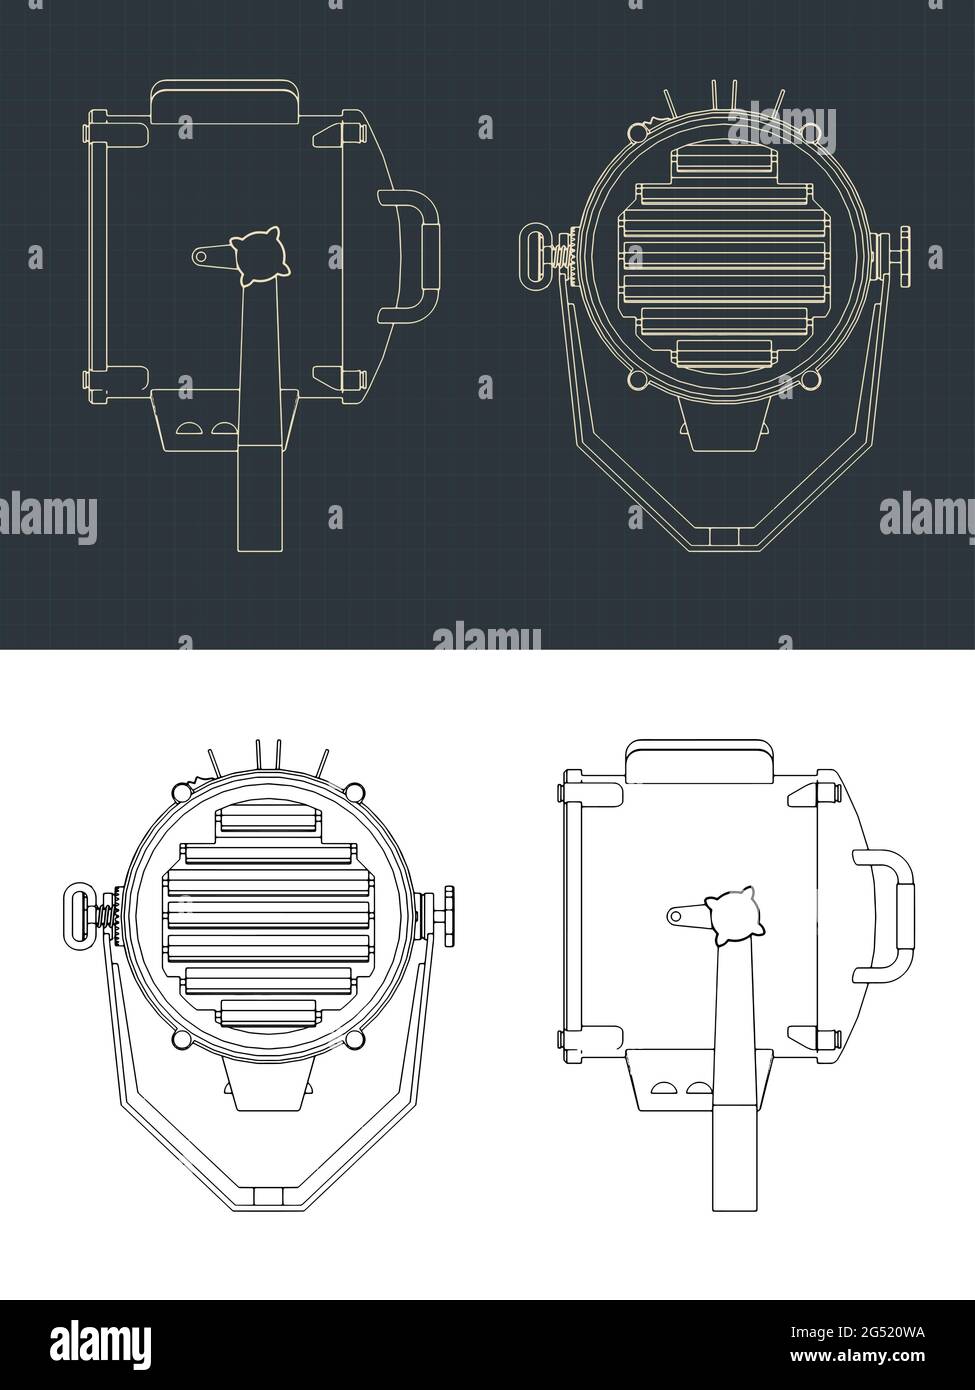 Stylized vector illustration of blueprints of signal Lamp Stock Vector